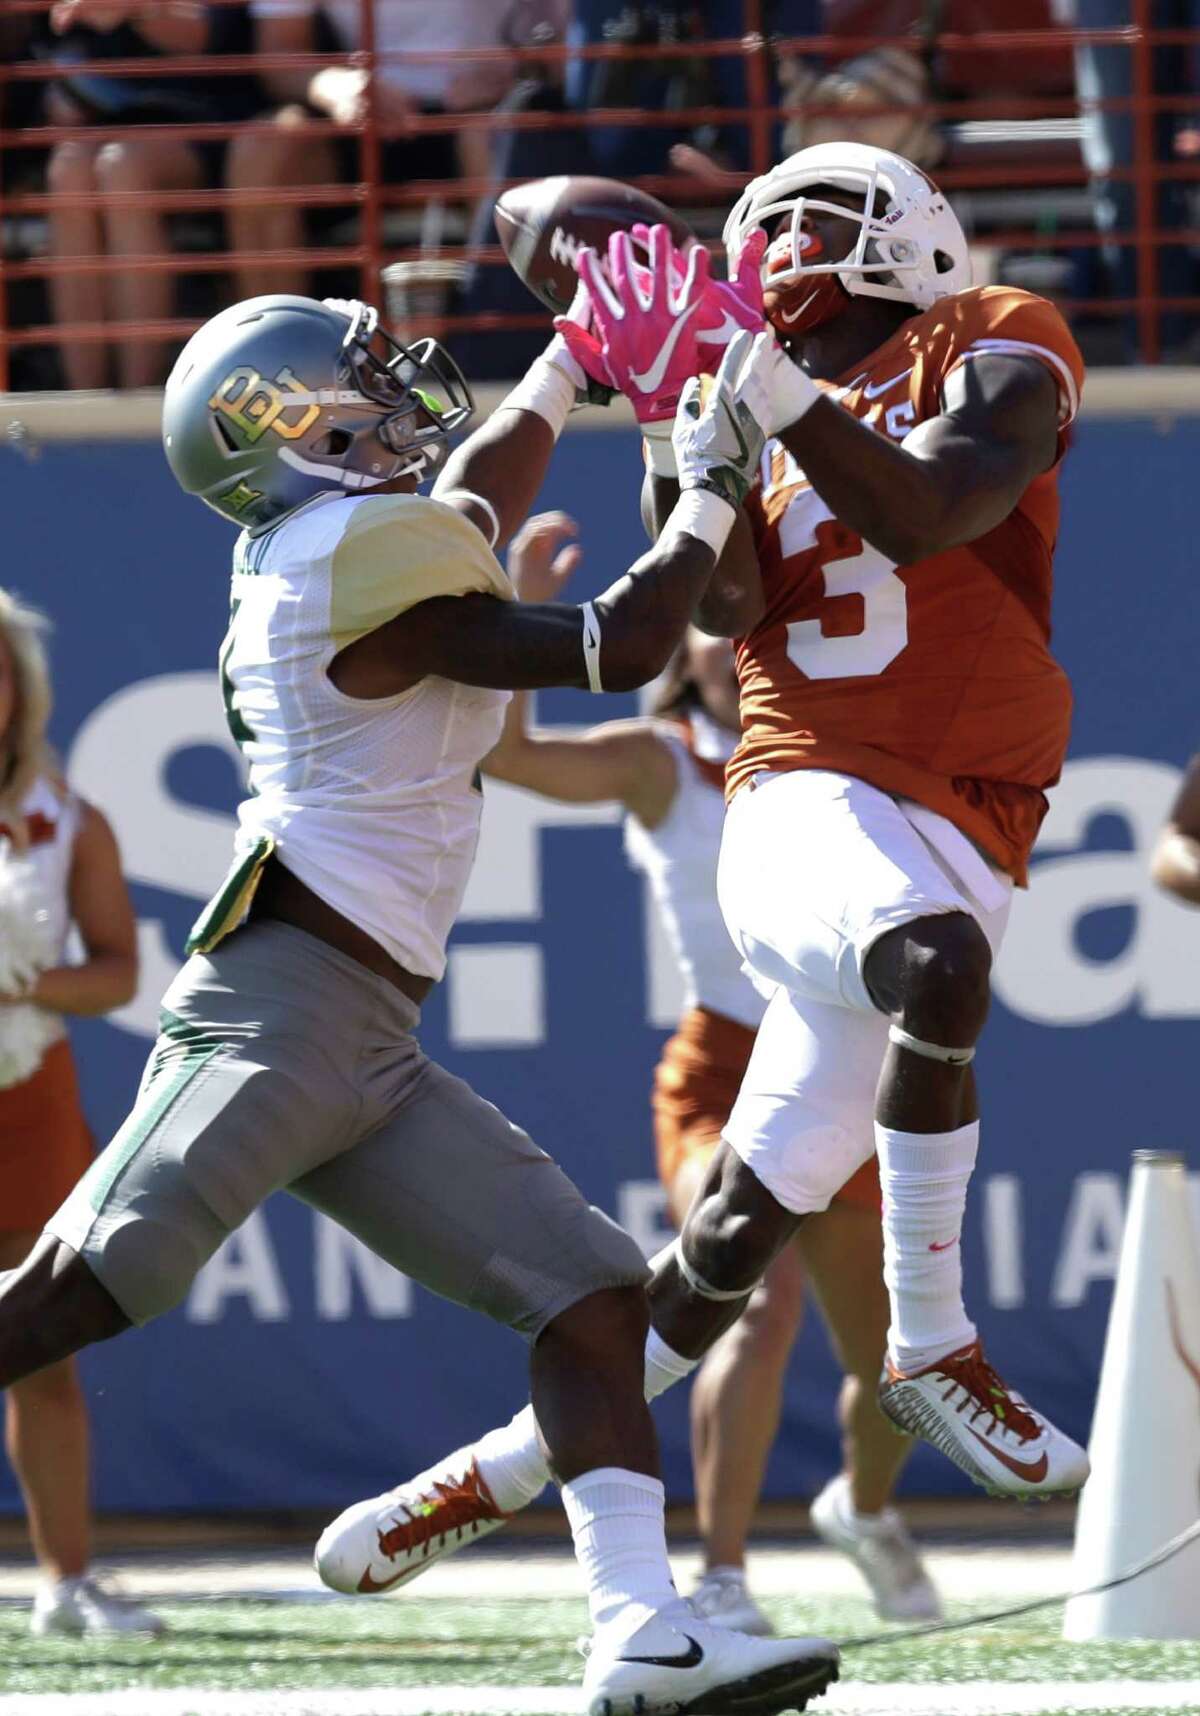 Texas wide receiver Armanti Foreman (3) makes a 40-yard catch over Baylor cornerback Grayland Arnold (4) during the first half on a NCAA college football game, Saturday, Oct. 29, 2016, in Austin, Texas. (AP Photo/Eric Gay)